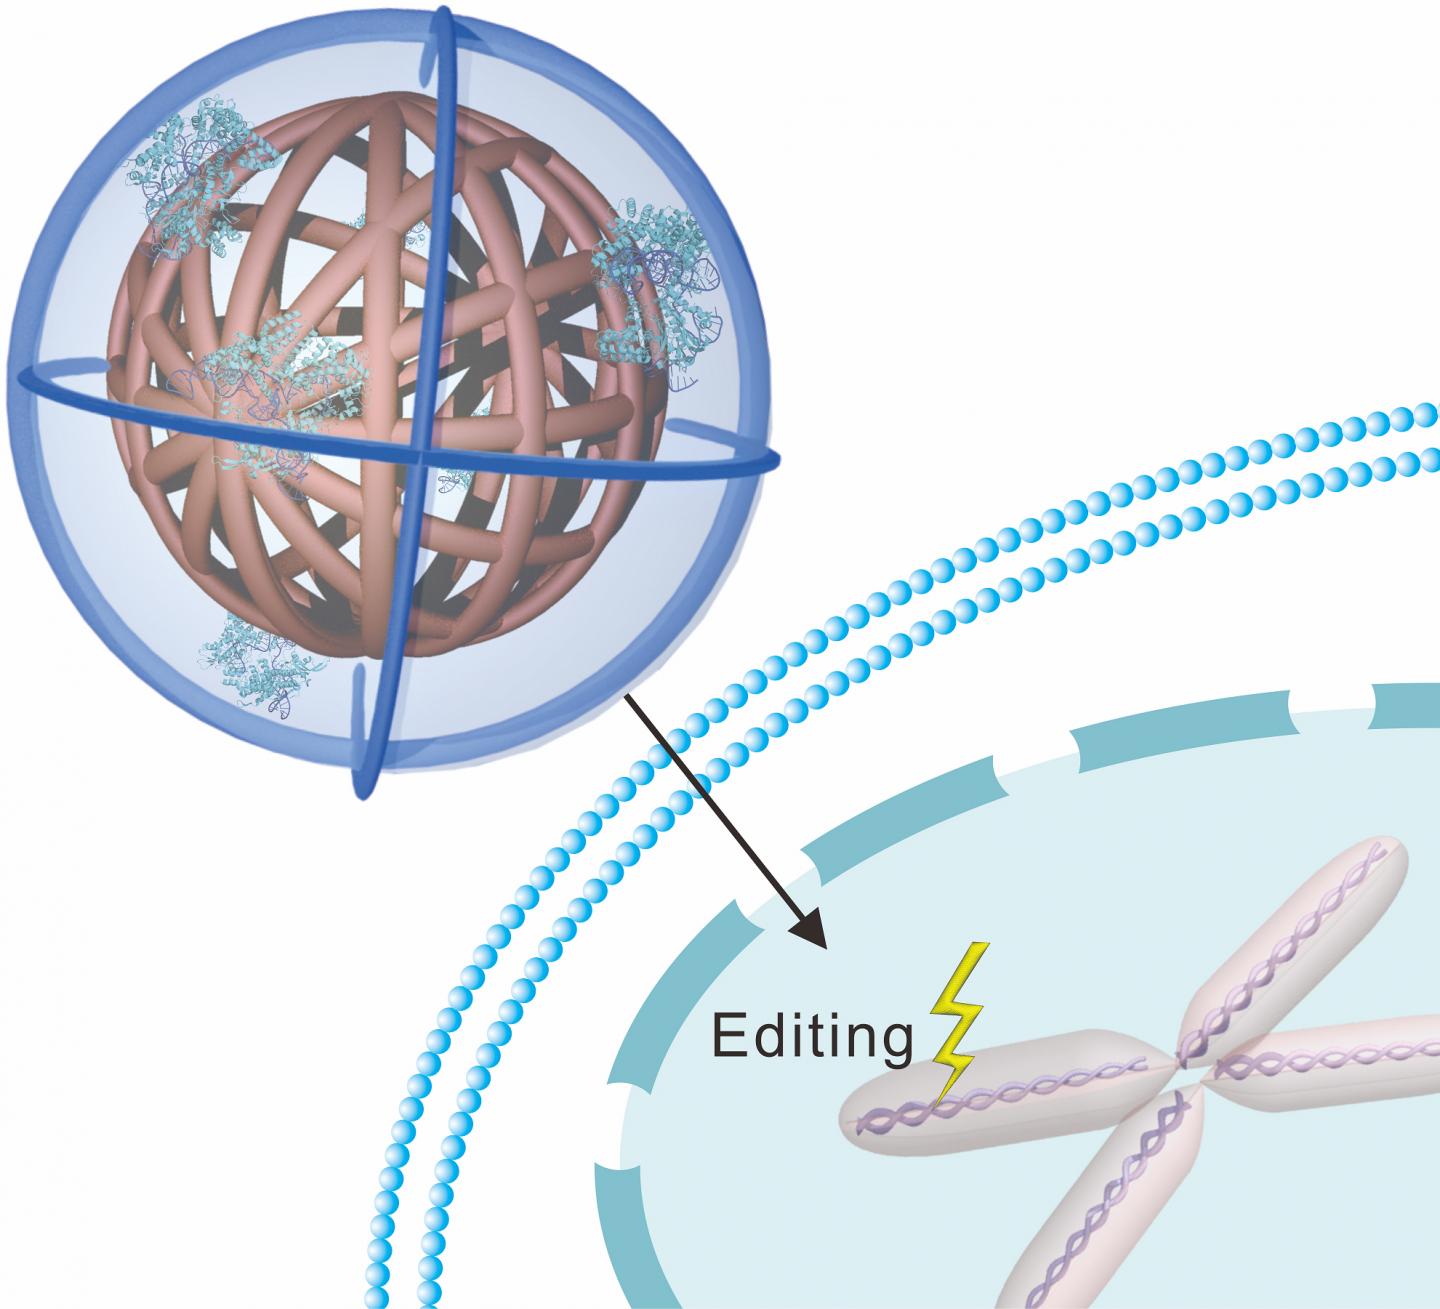 When the nanoclew comes into contact with a cell, the cell absorbs the nanoclew completely—swallowing it and wrapping it an endosome. Nanoclews are coated with a positively charged polymer that breaks down the endosome, setting the nanoclew free inside the cell, thus allowing CRISPR-Cas9 to make its way to the nucleus. [North Carolina State University]